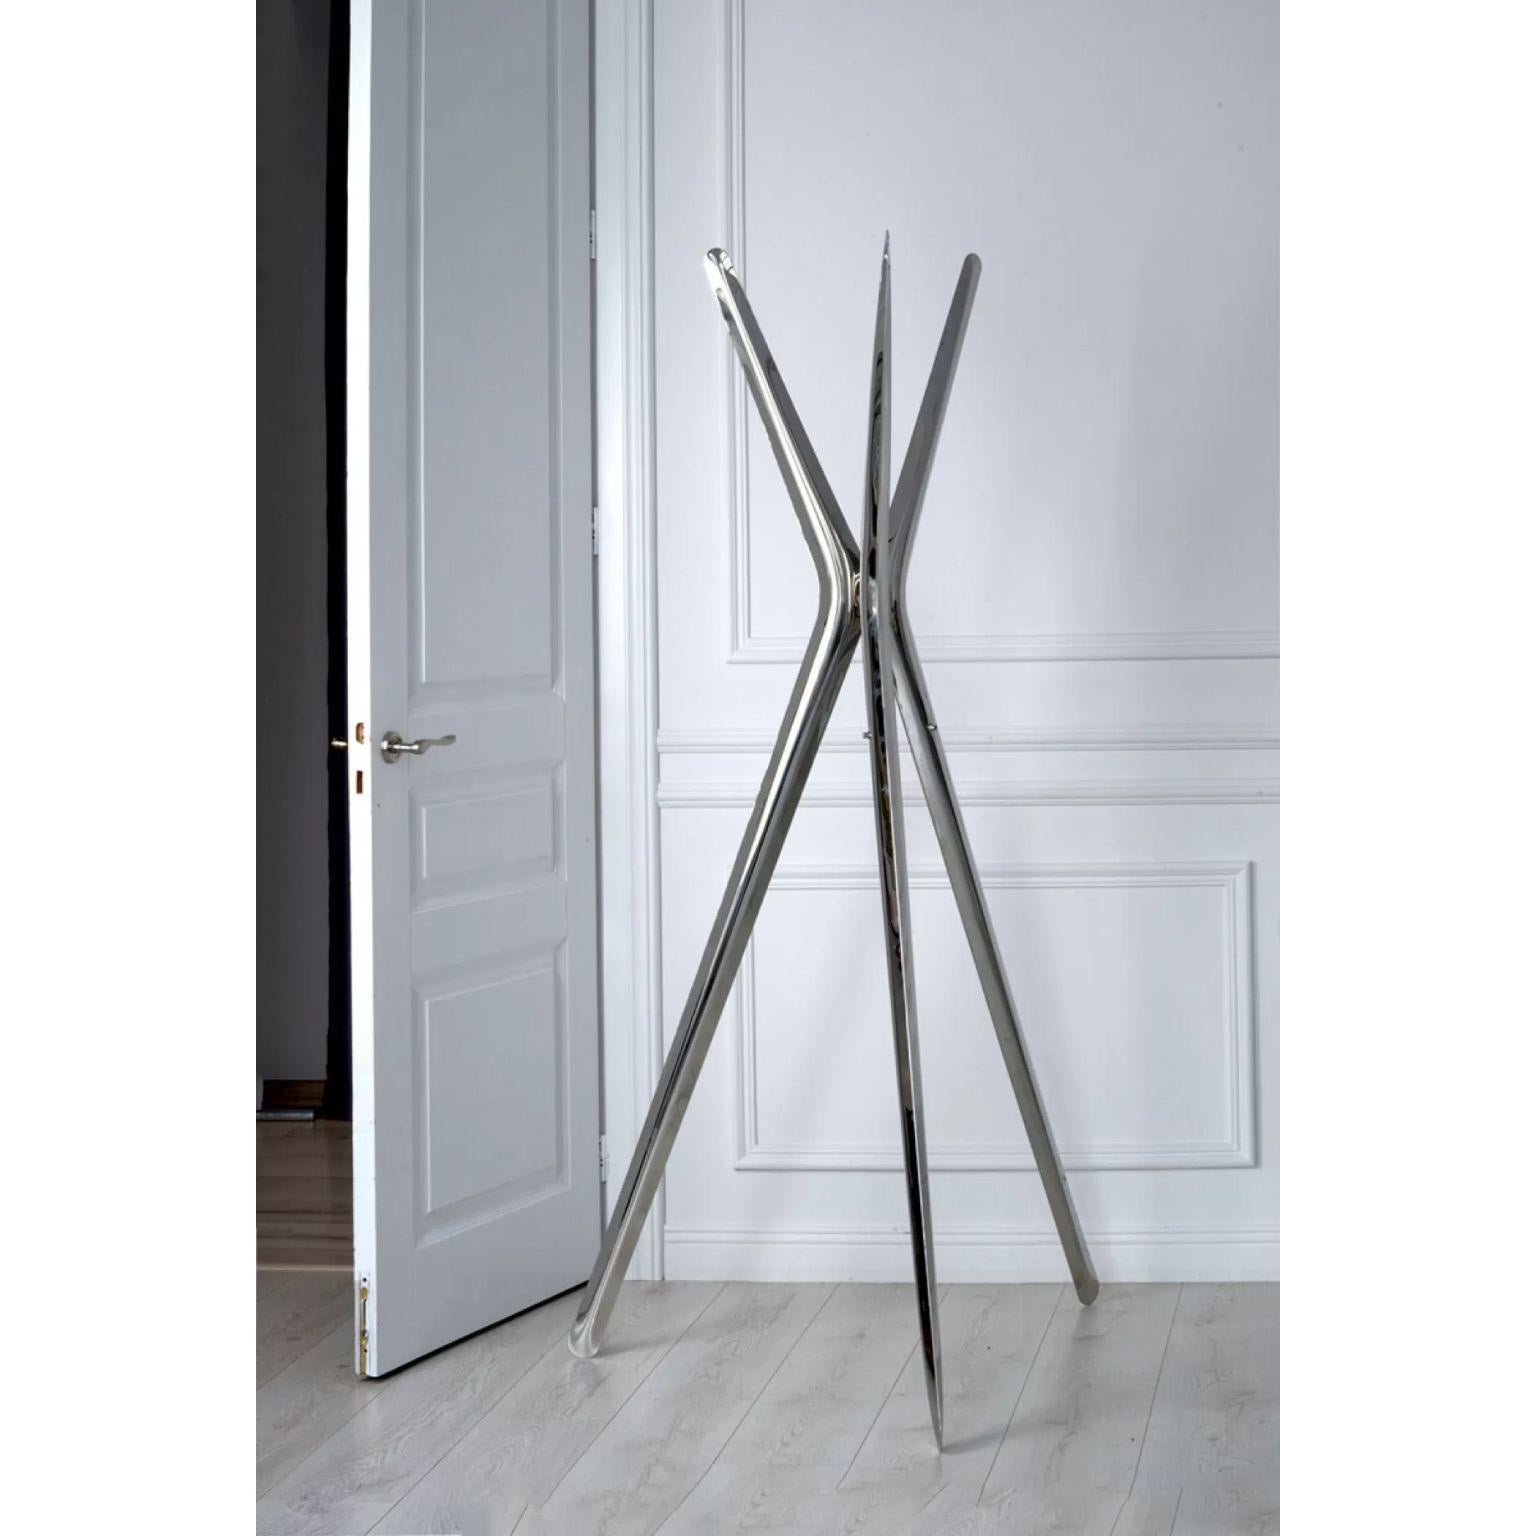 Snopek Hanger by Zieta
Dimensions: Ø 88 x H 173 cm.
Materials: Polished stainless steel.

SNOPEK—a three-legged standing hanger that intriguingly enriches interiors. It’s a practical coat rack and modern sculptural accent in the space at the same